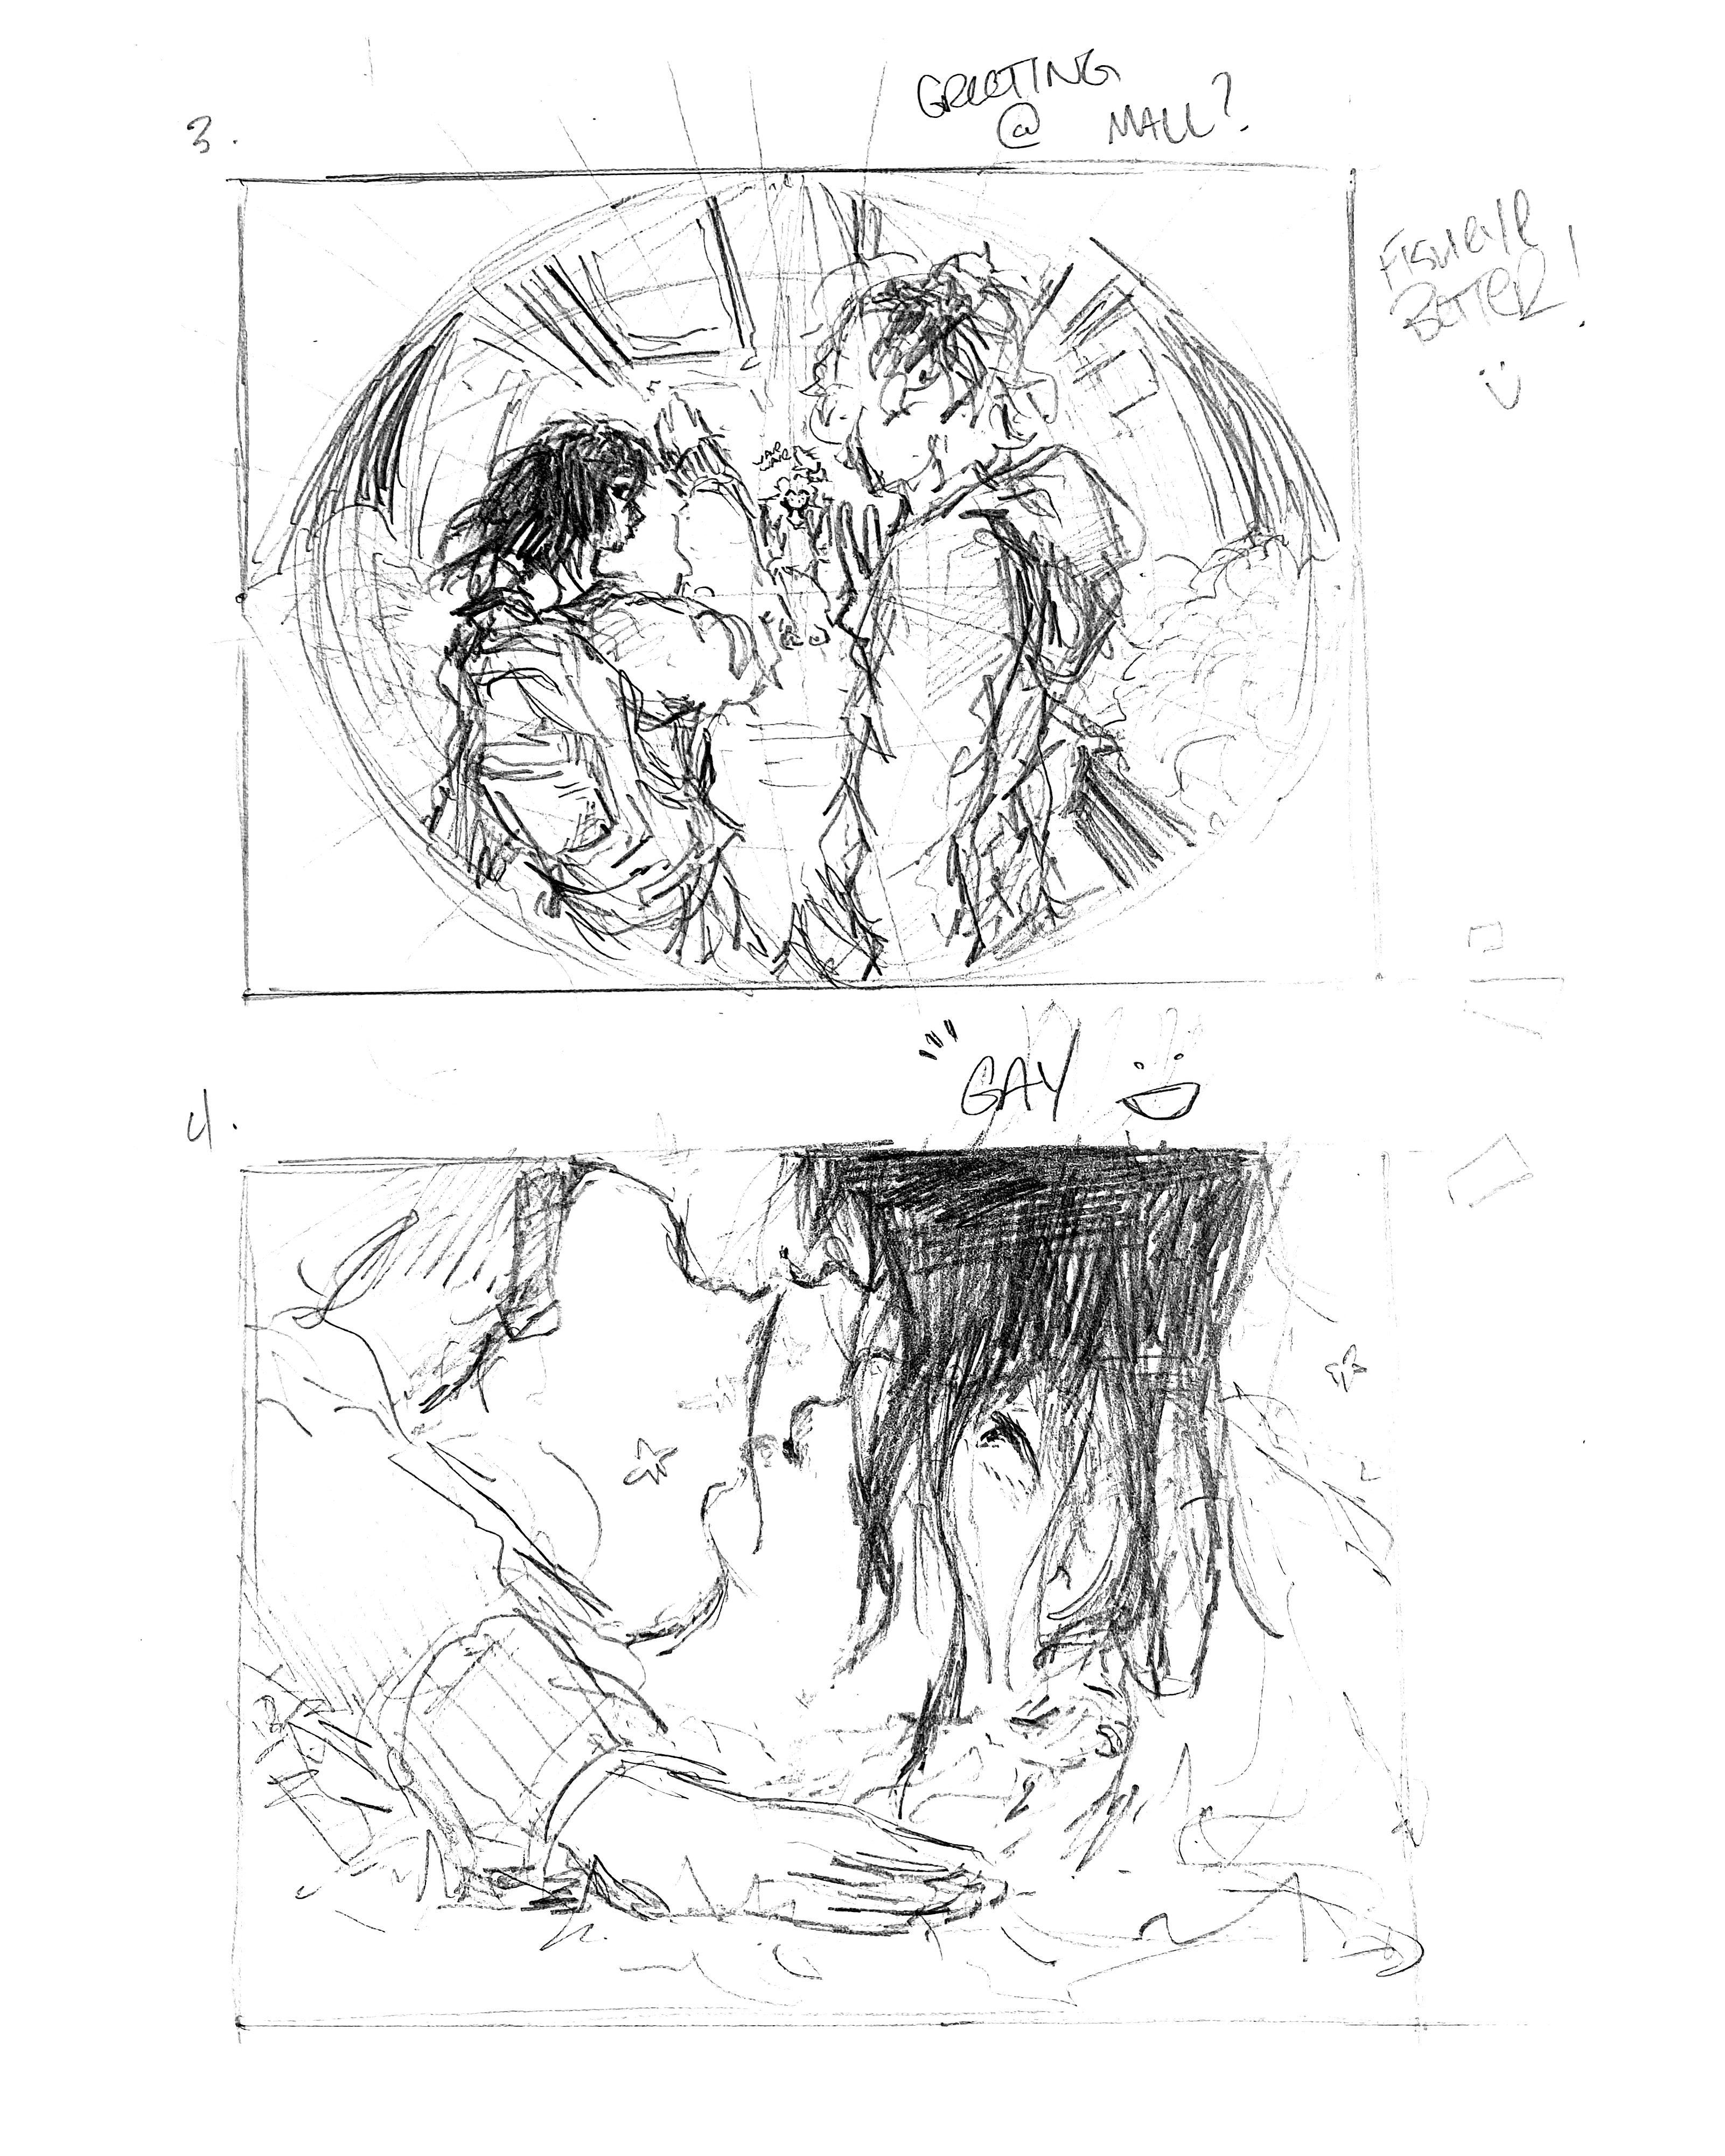 two sketches, one on top of two people waving in a fisheye lense, the other of two girls, one on the ground and the other above her